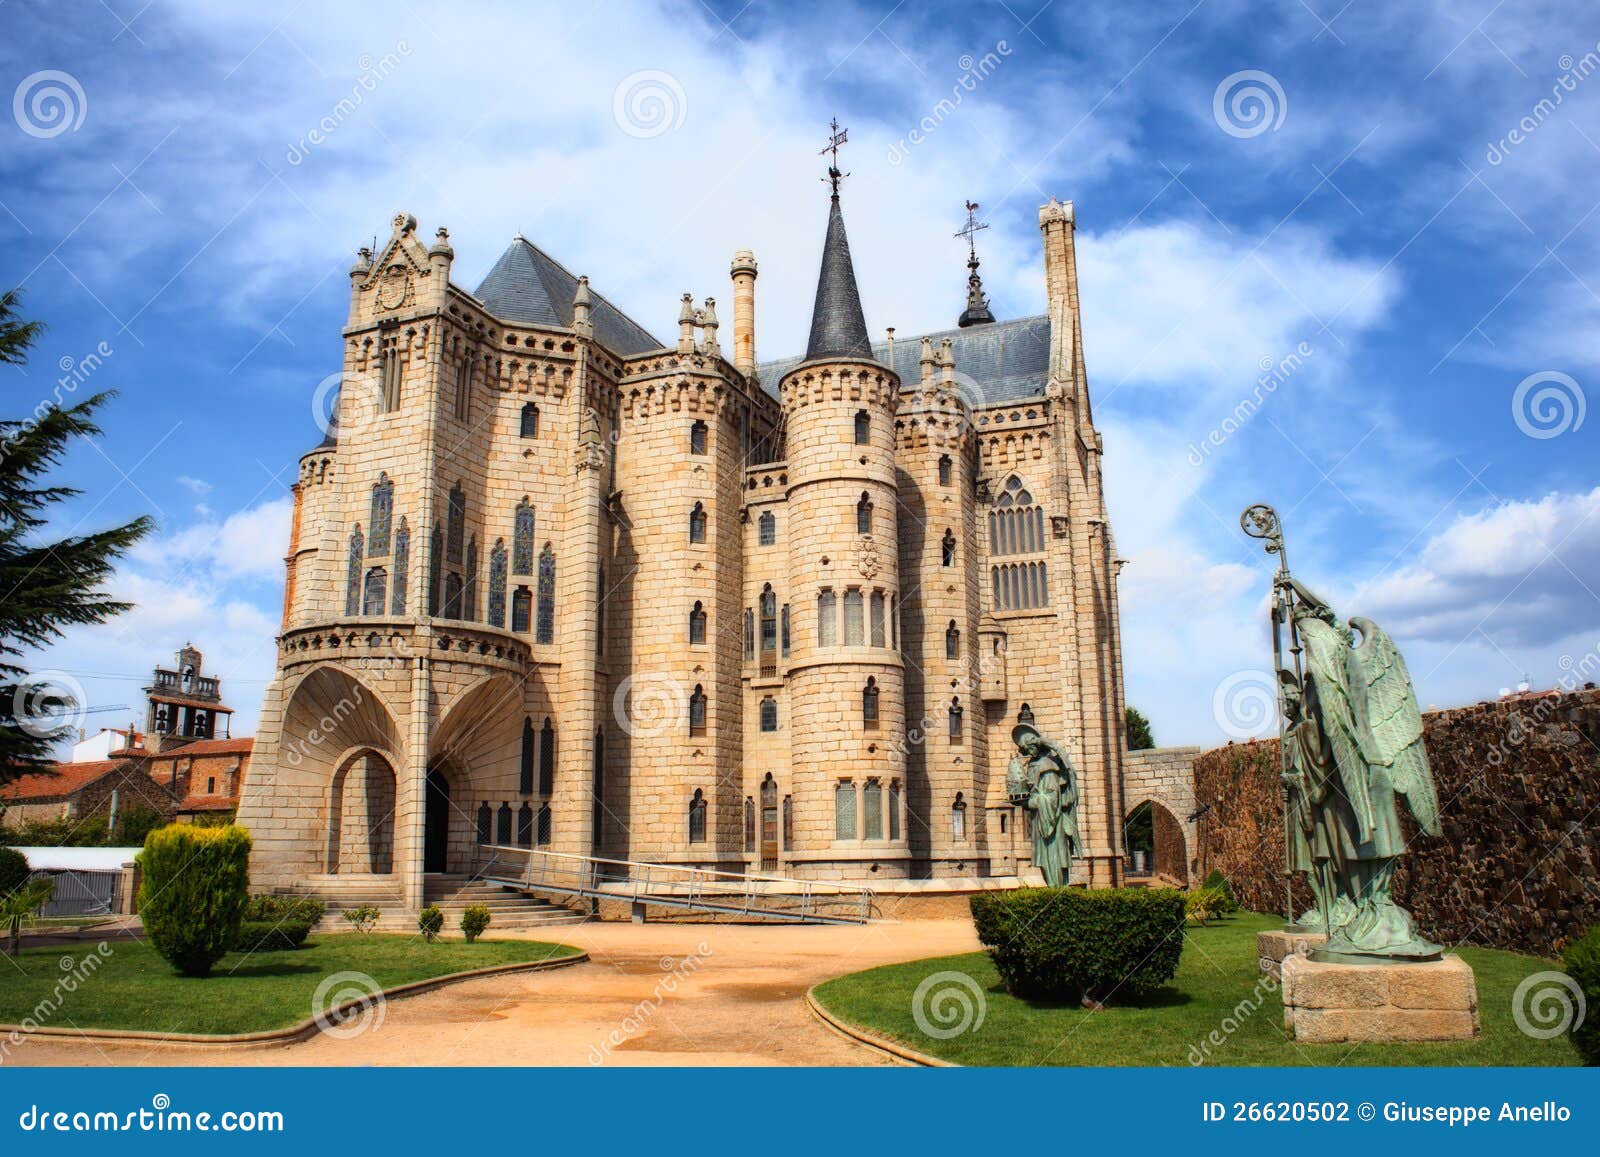 the episcopal palace in astorga